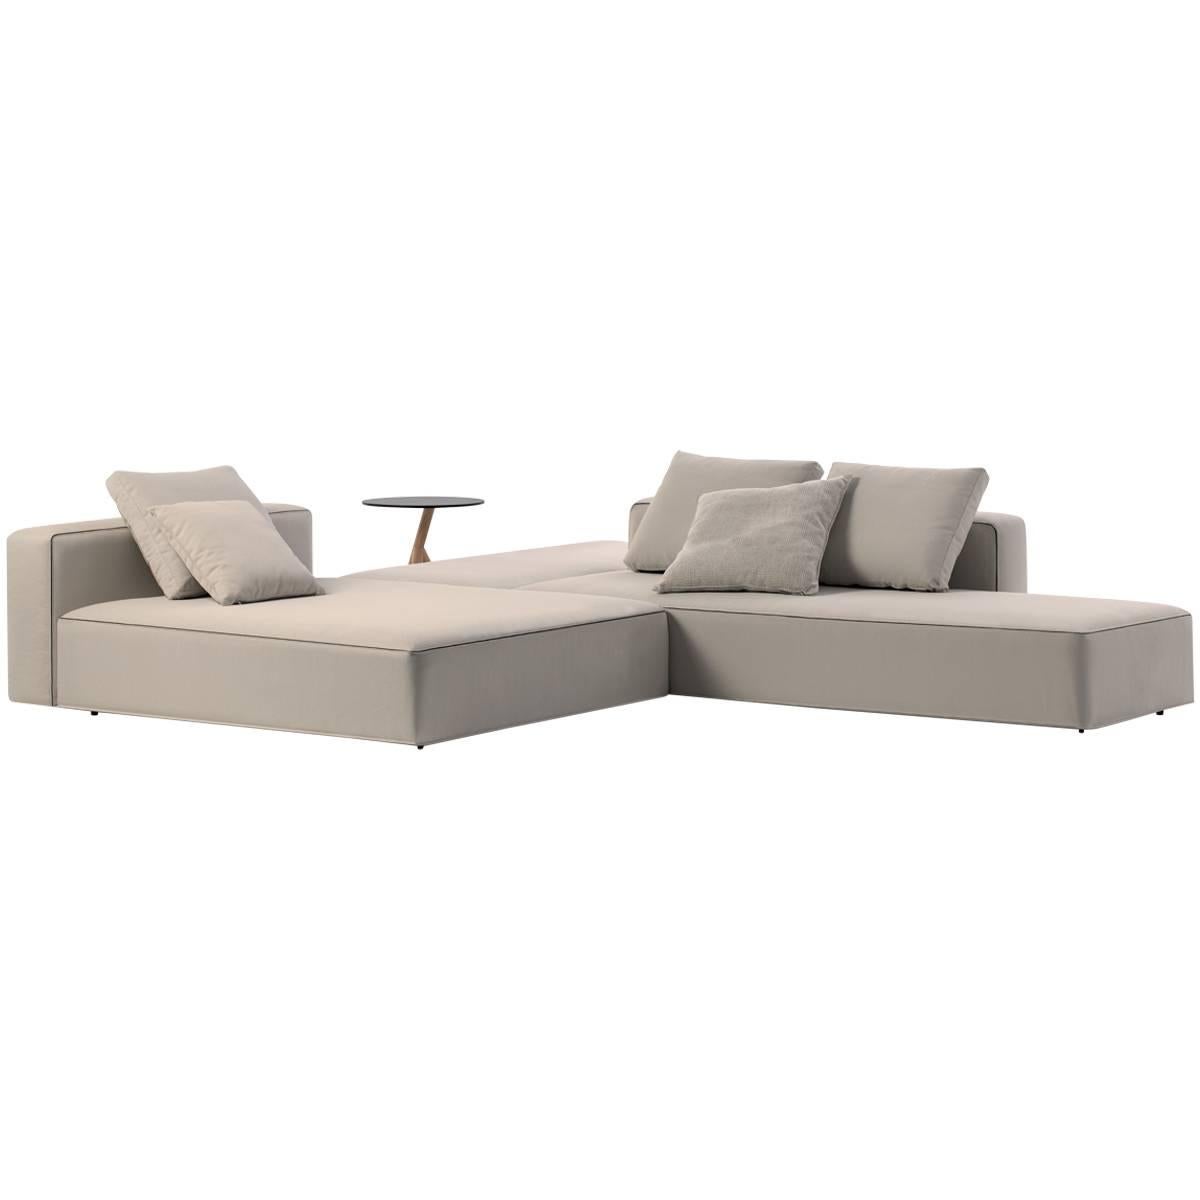 Roda Dandy Sofa for Outdoor or Indoor Use by Rodolfo Dordoni For Sale